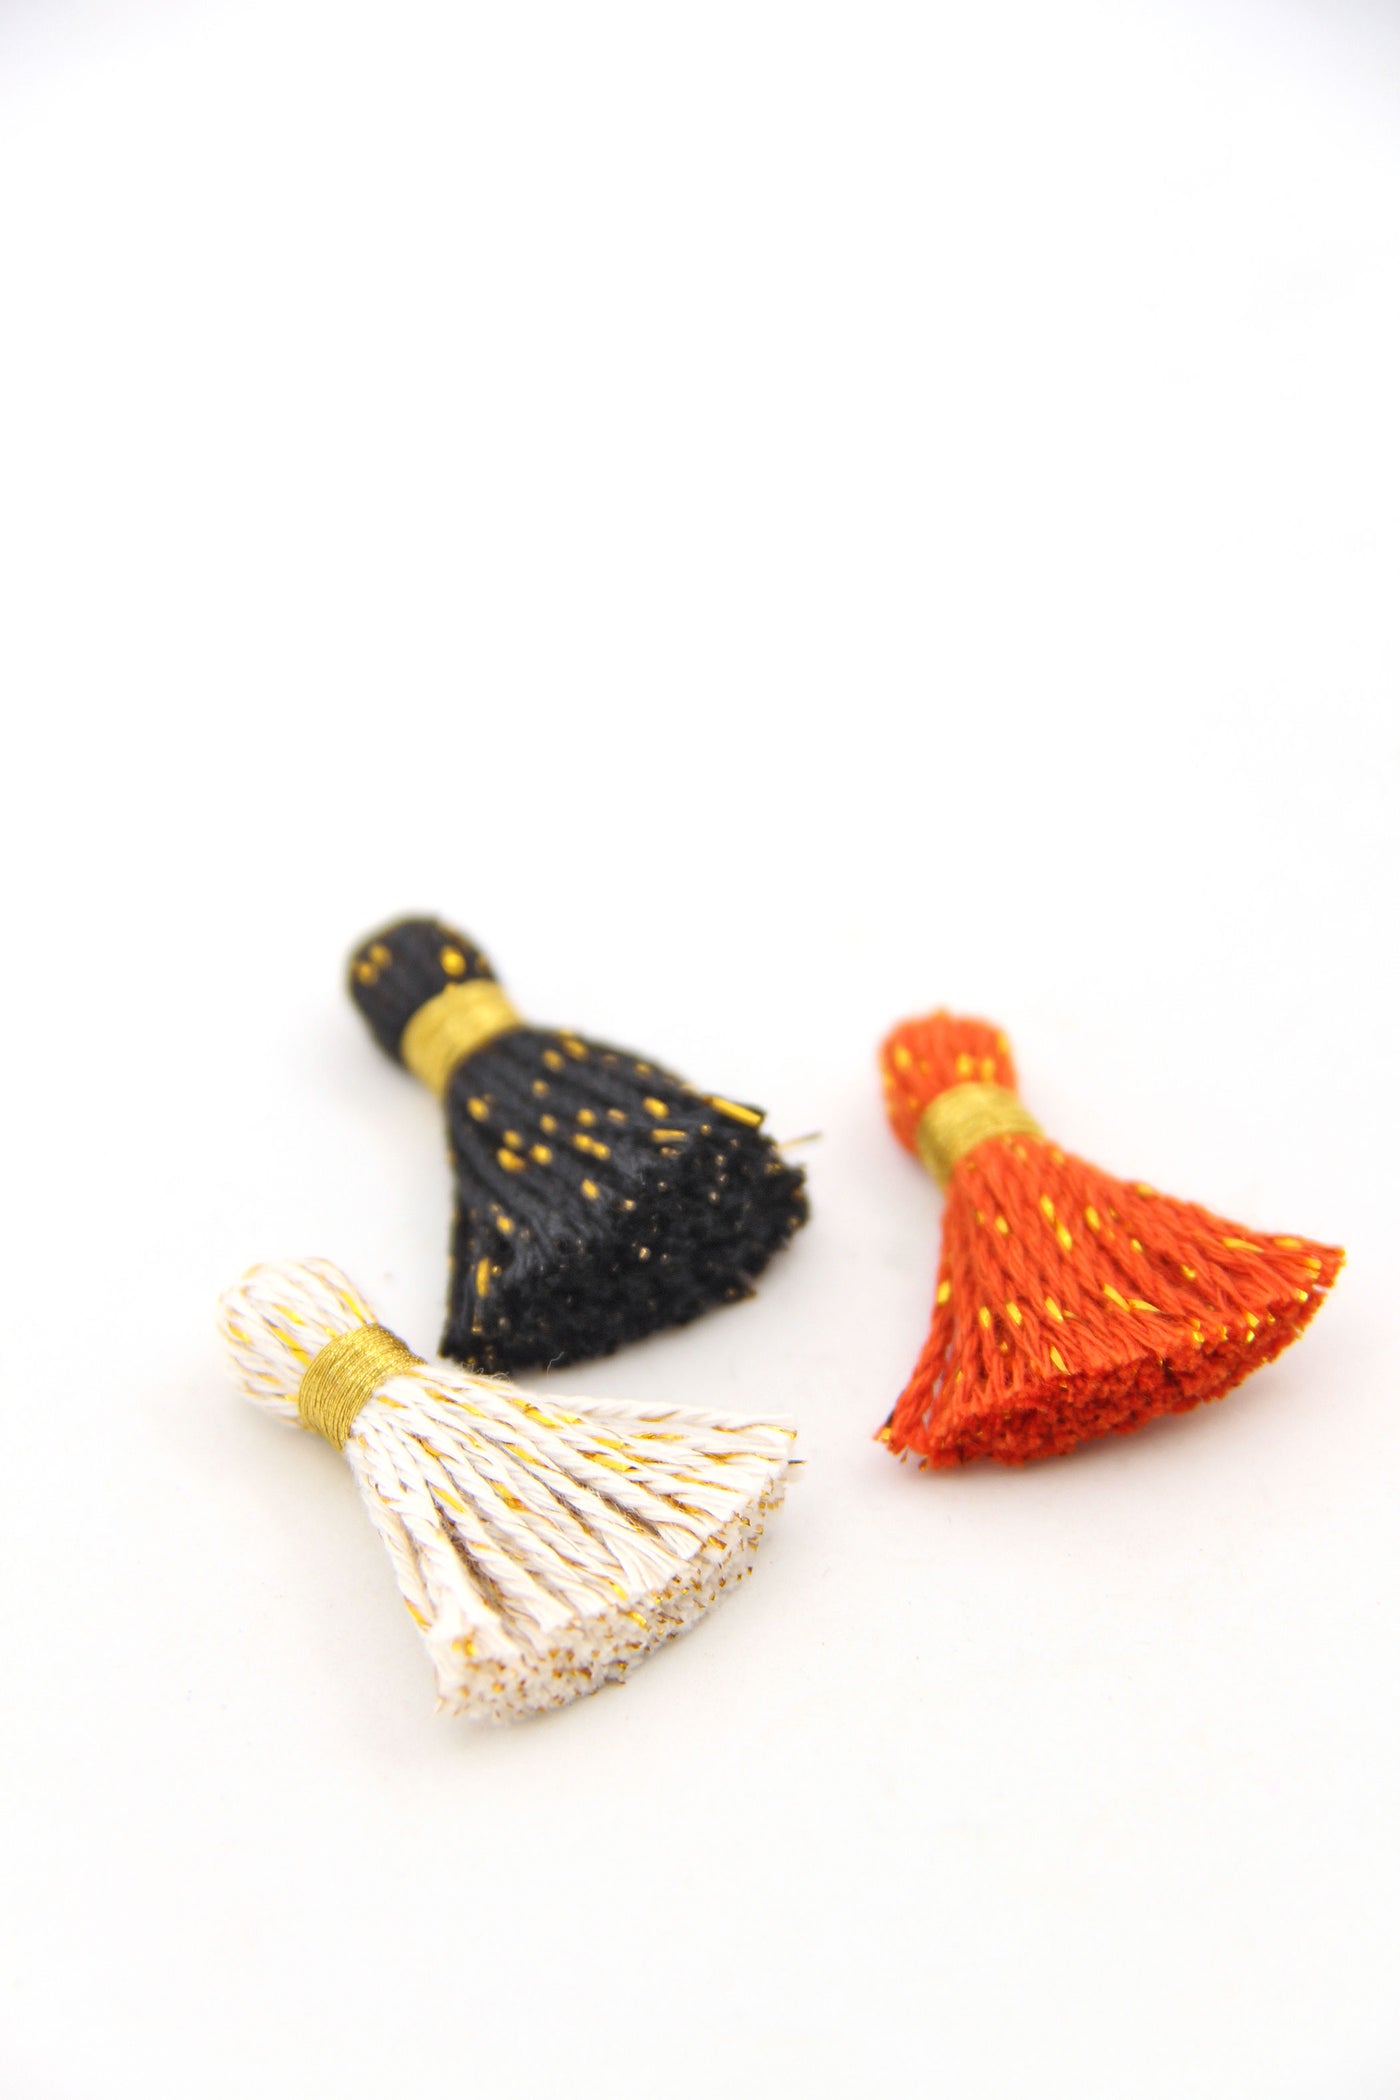 Halloween Cotton & Sparkly Tinsel Tassels, Halloween Pom Poms for your Halloween Collection